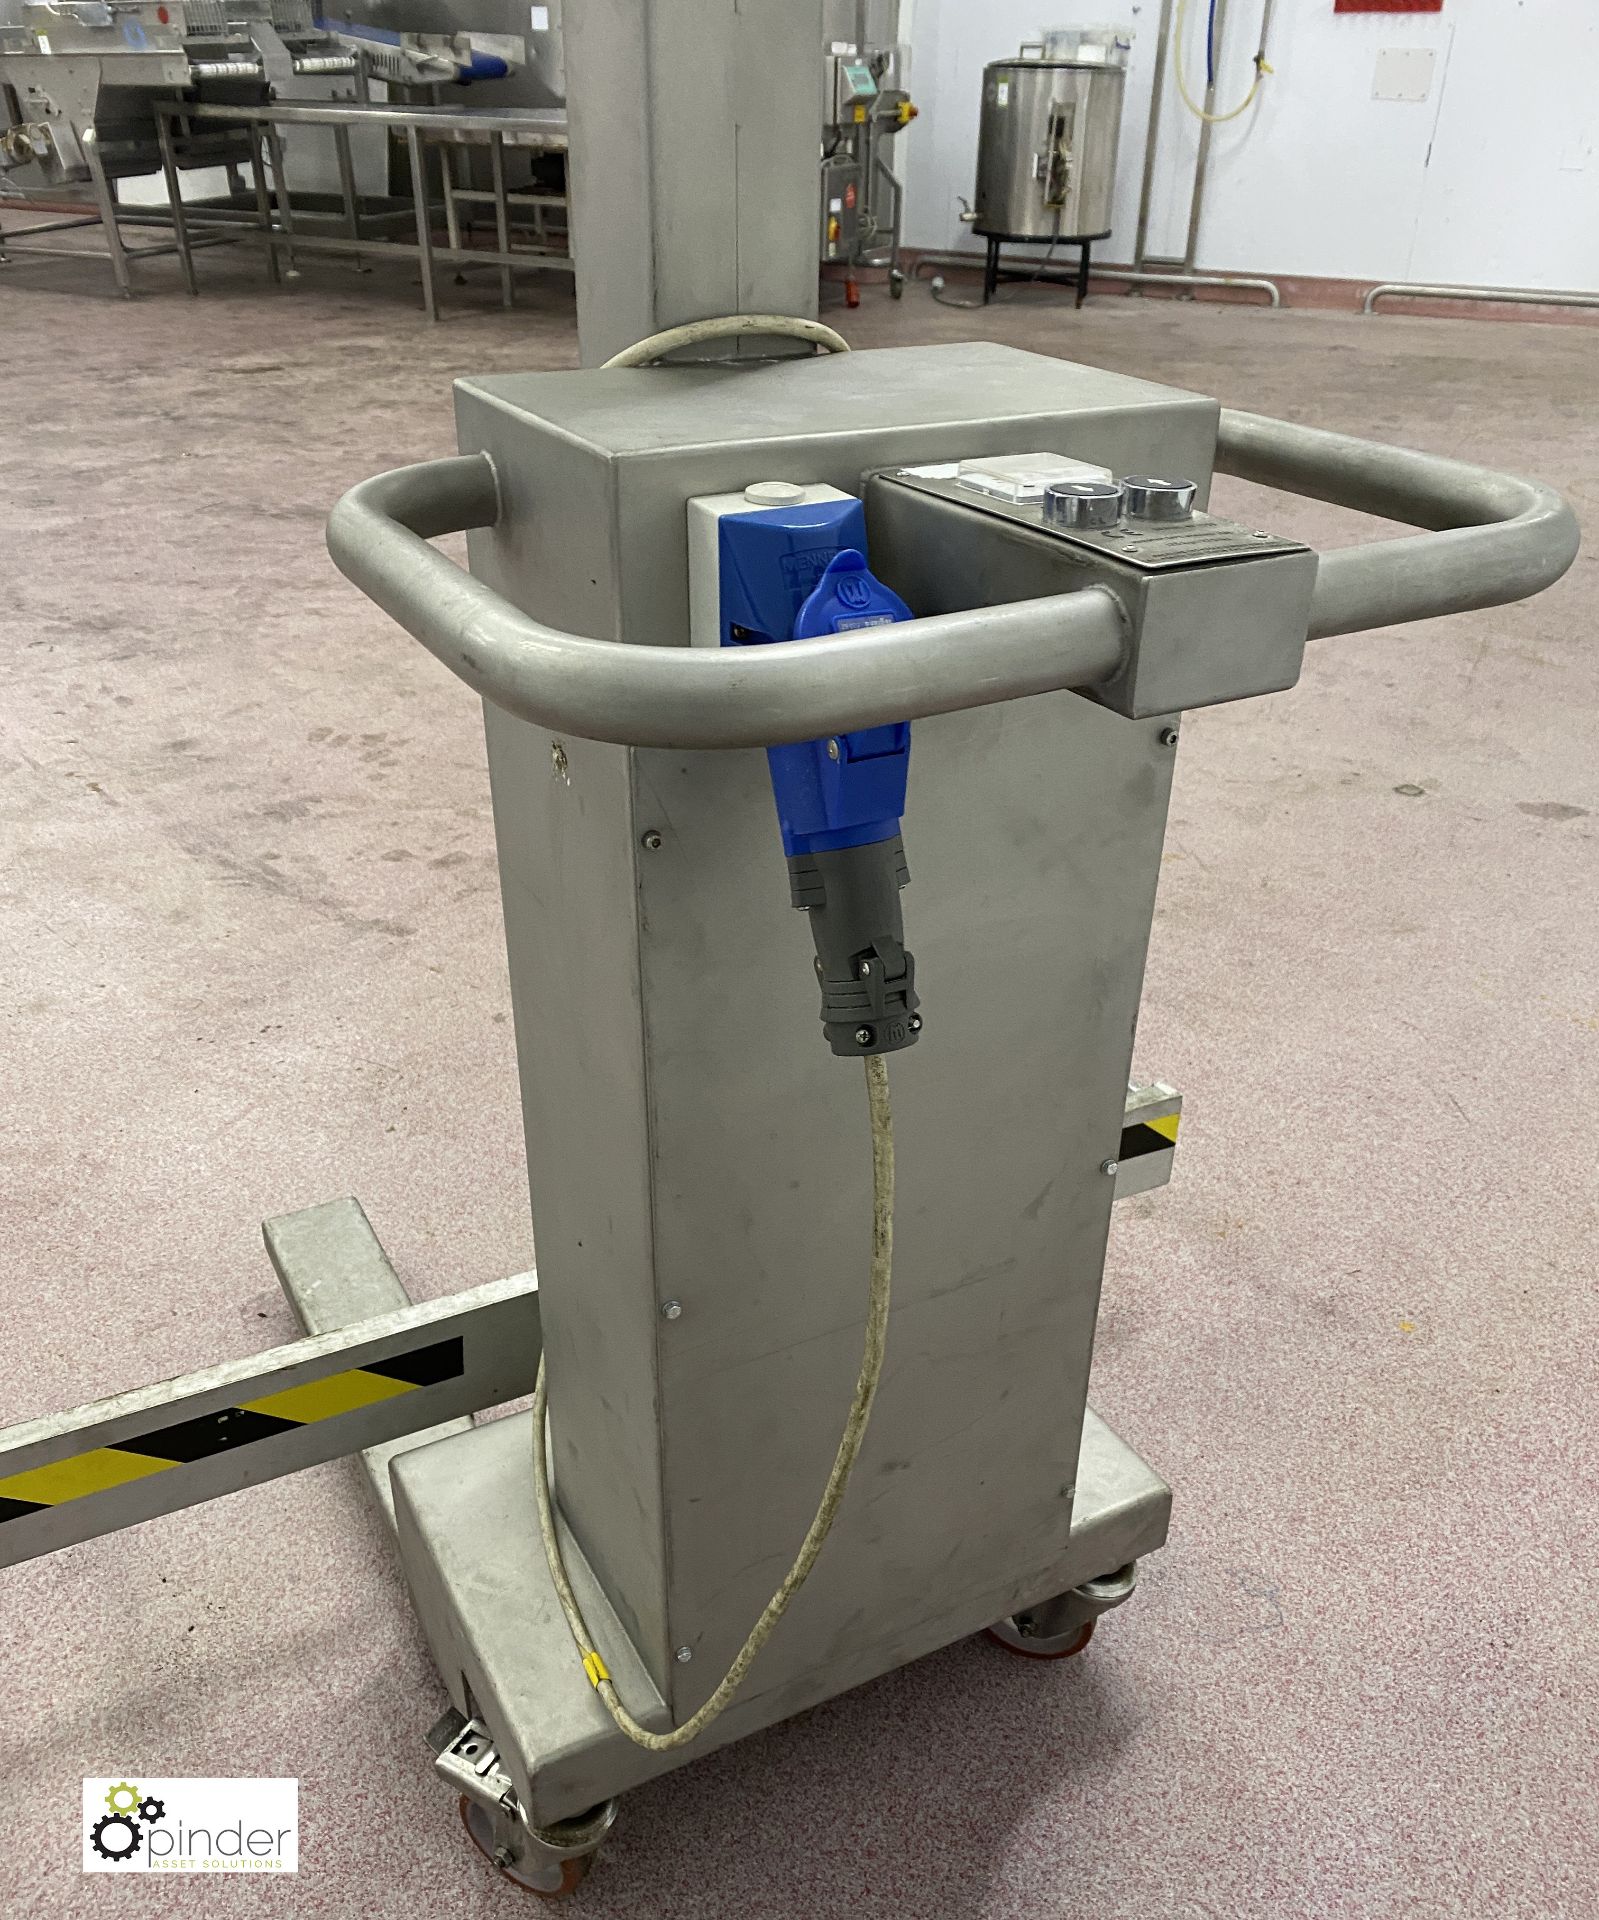 Compac mobile stainless steel Tub/Bin Lifter, swl 125kg, 240volts, 16amps (please note there is a - Image 3 of 4